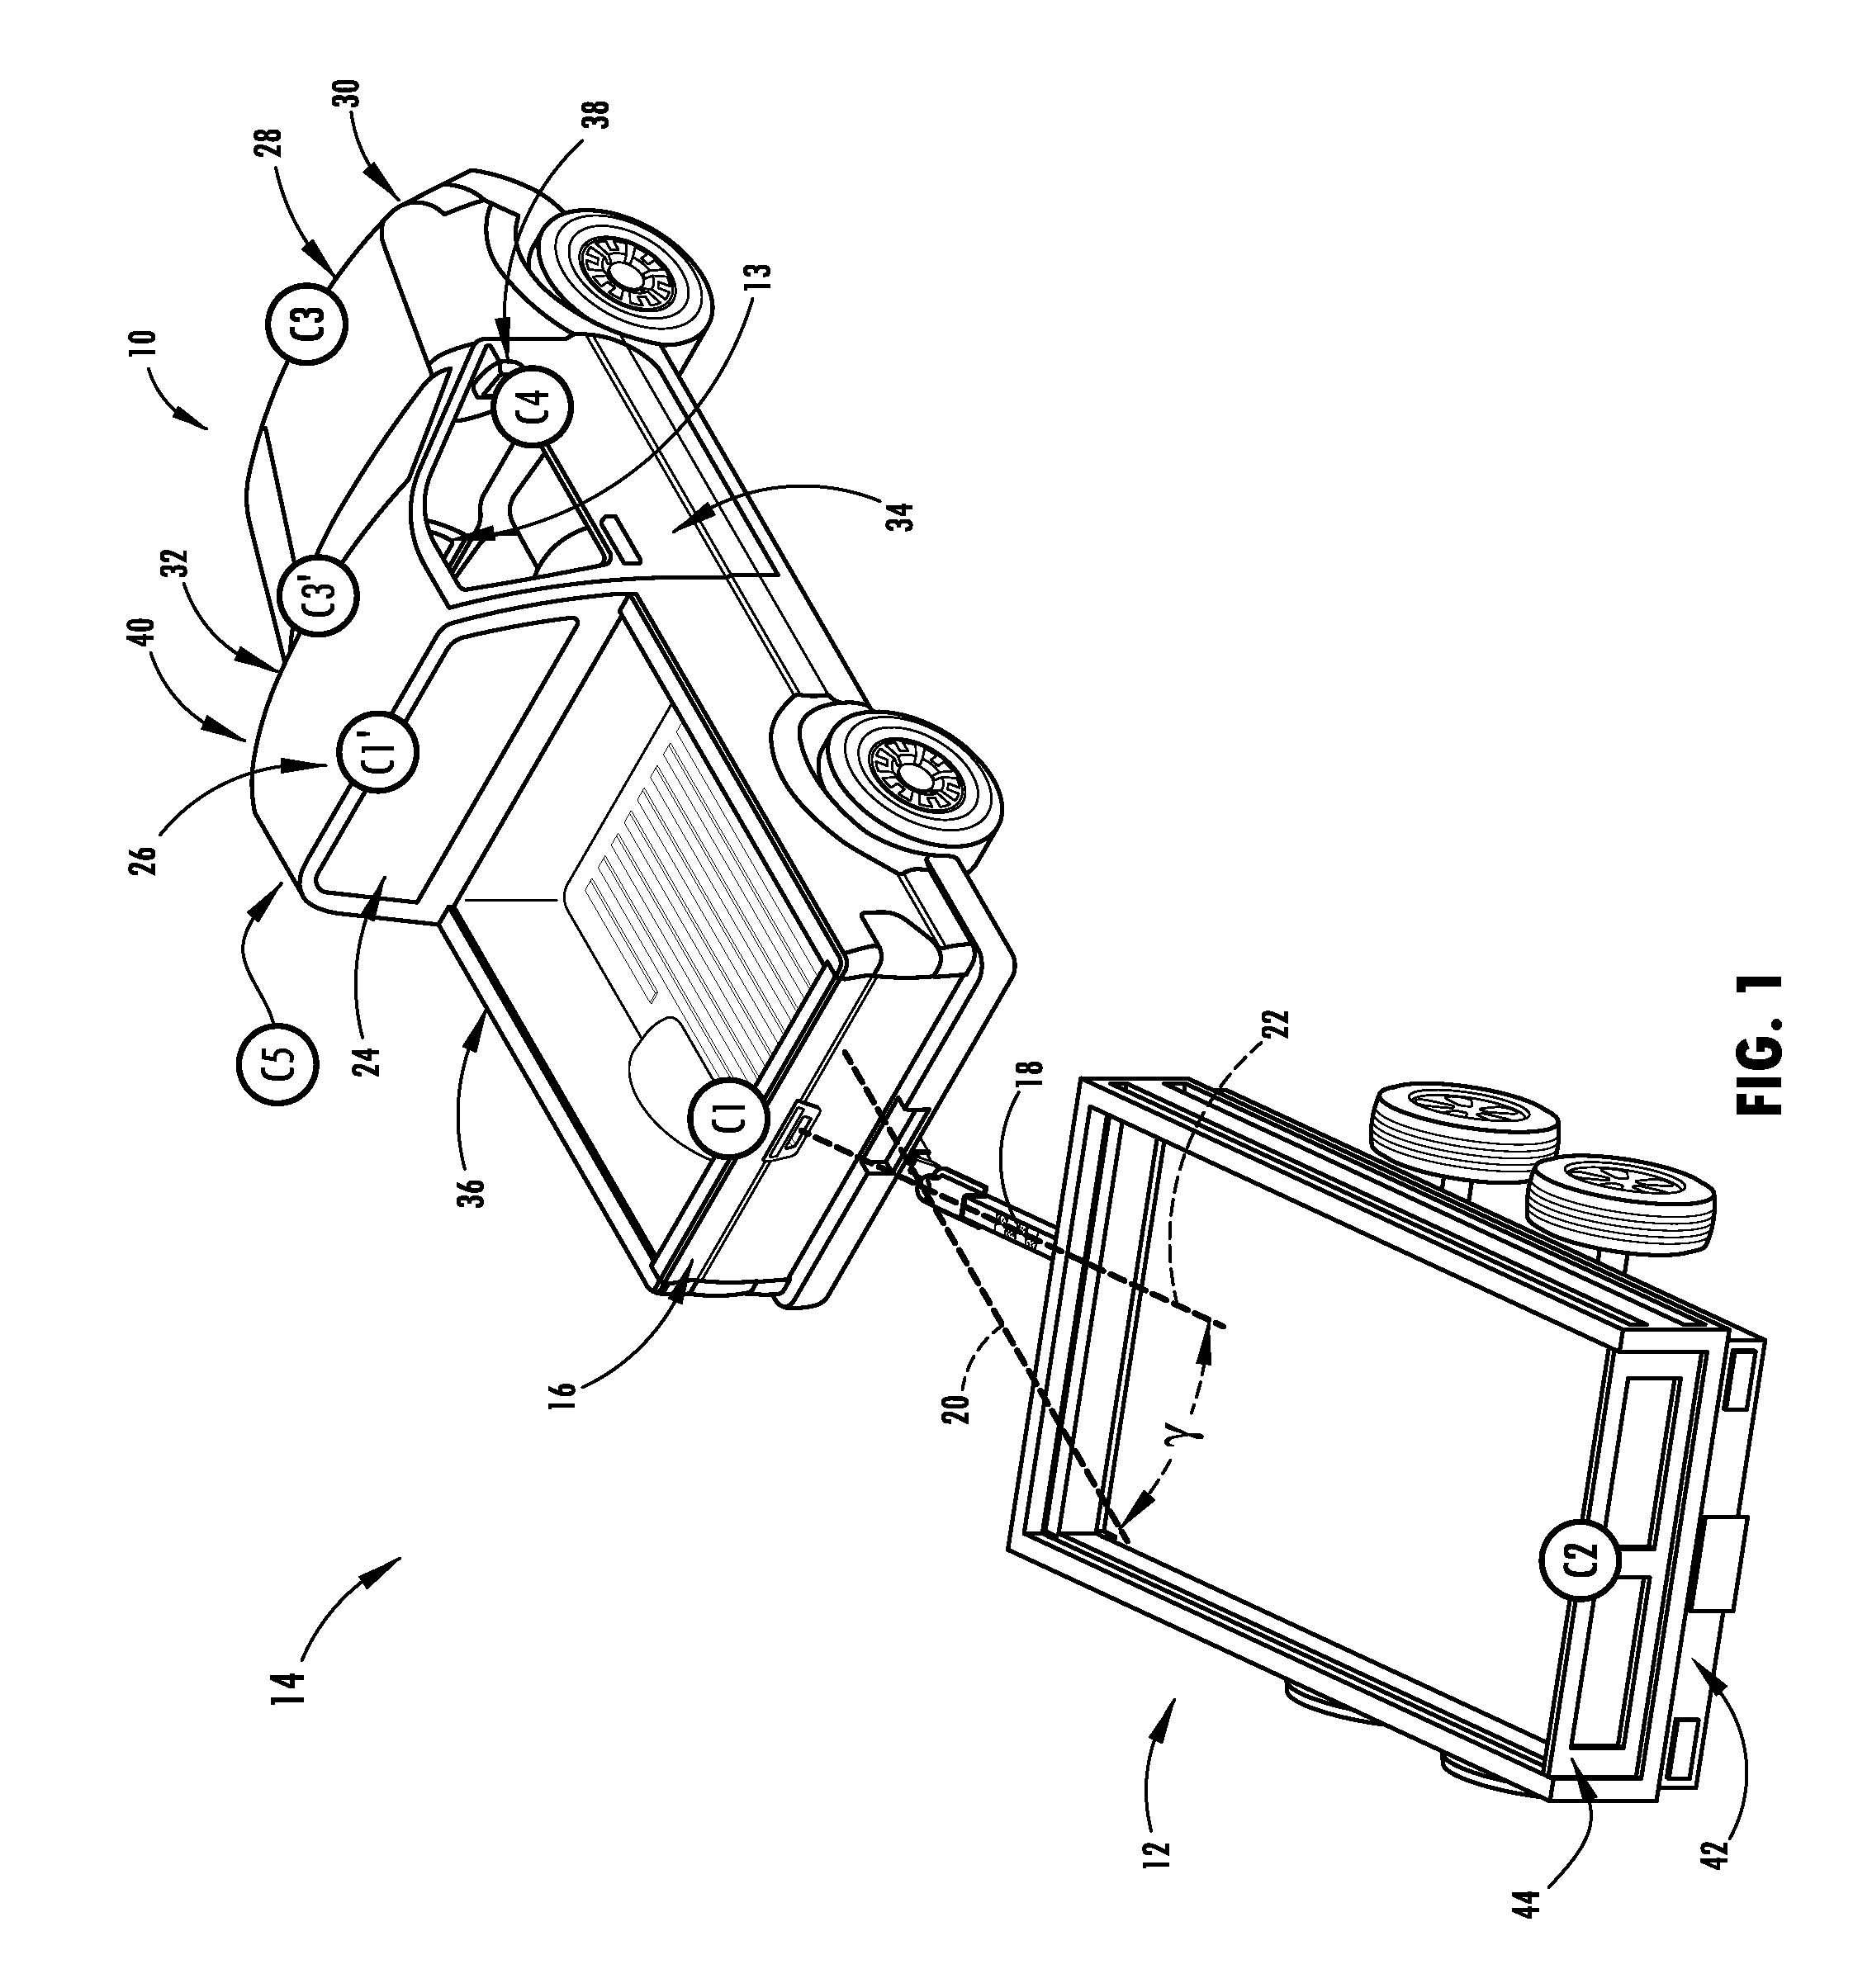 Method of inputting a path for a vehicle and trailer